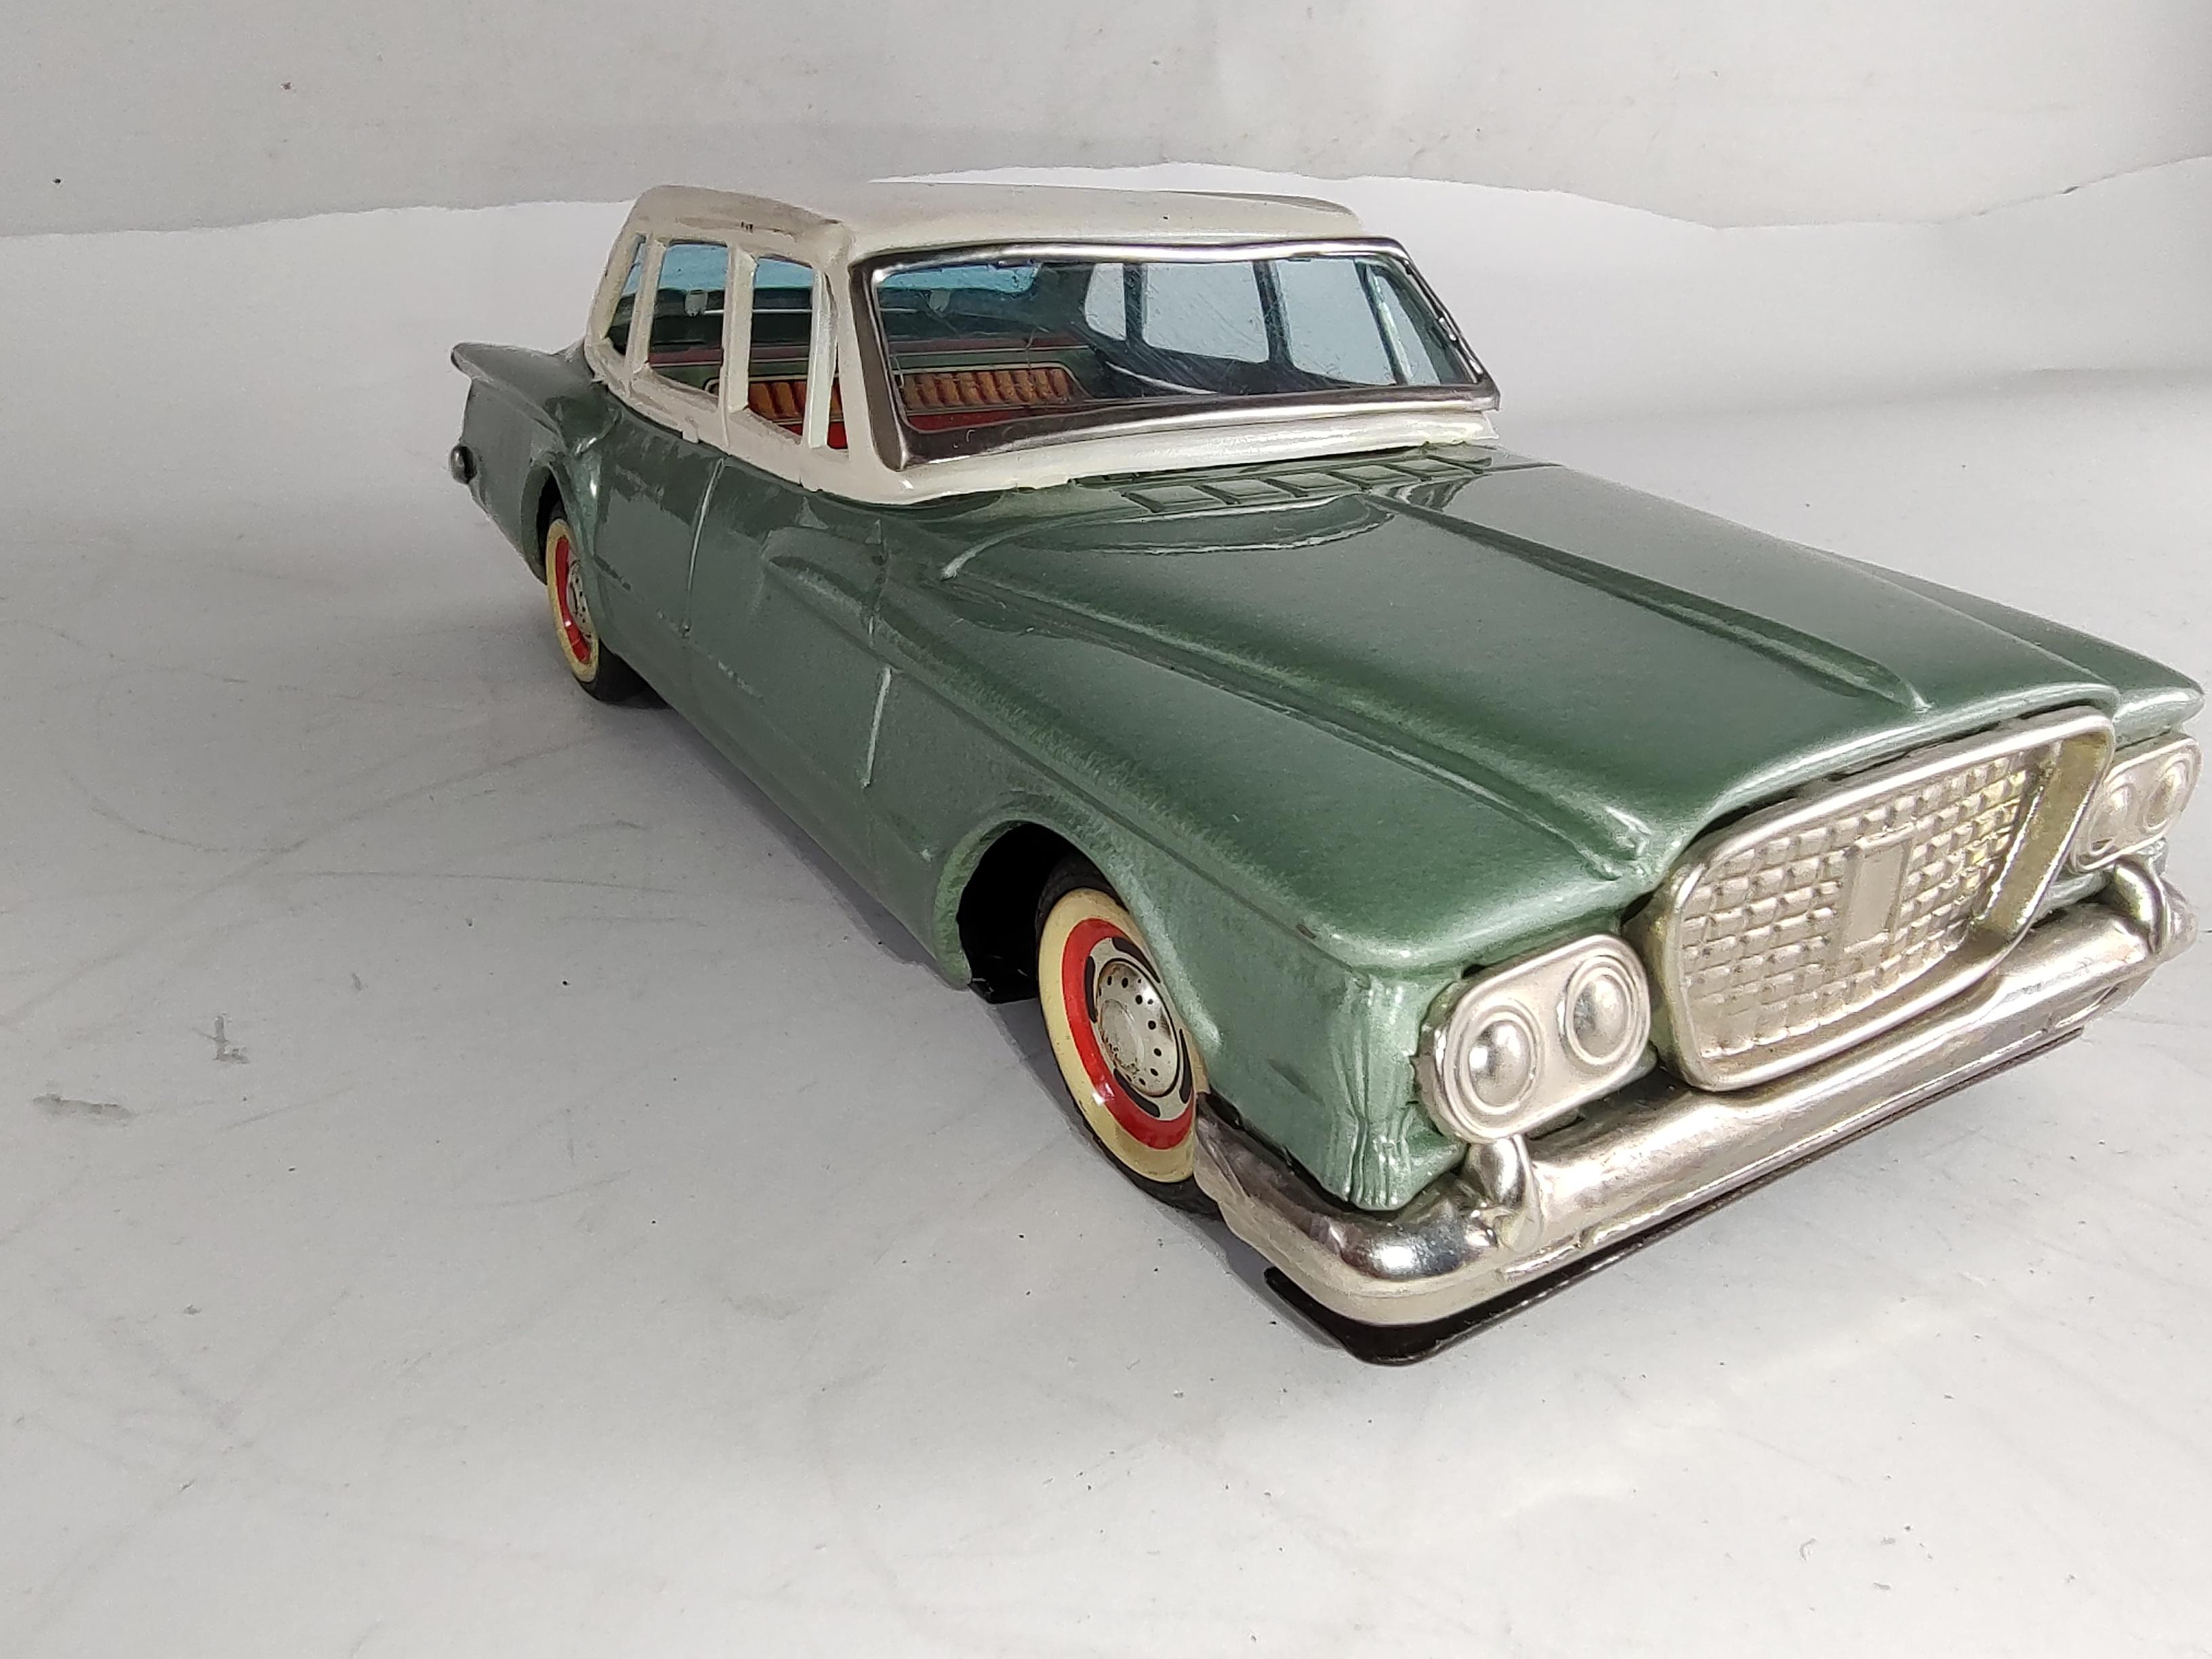 Midcentury Japanese Tin Litho Toy Plymouth Valiant, circa 1962 For Sale 2